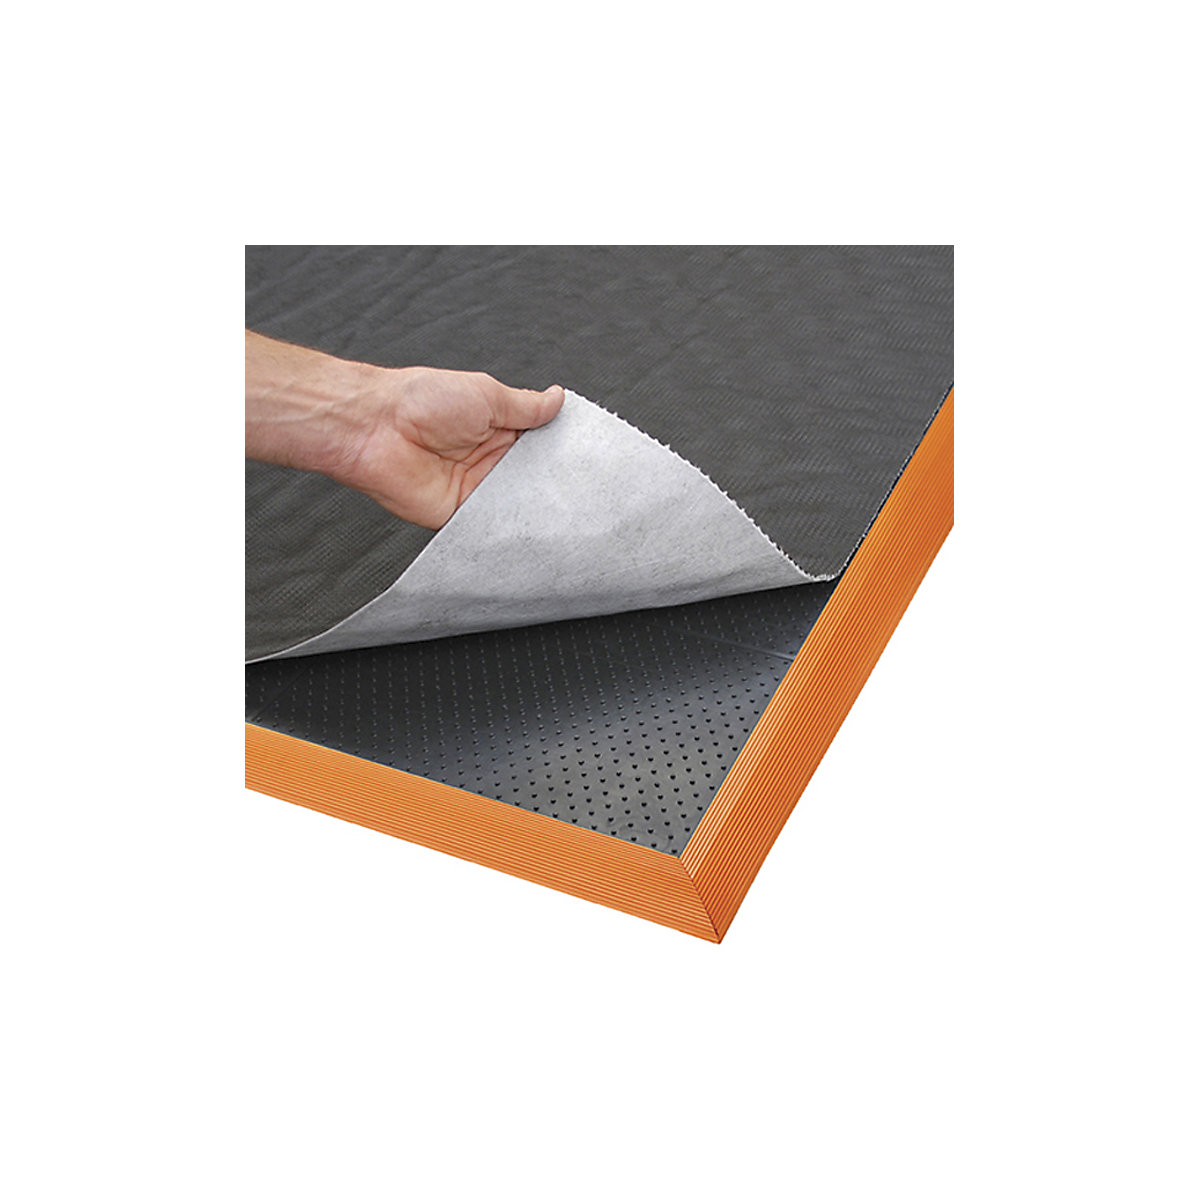 Sorb Stance™ nitrile matting with fleece - NOTRAX